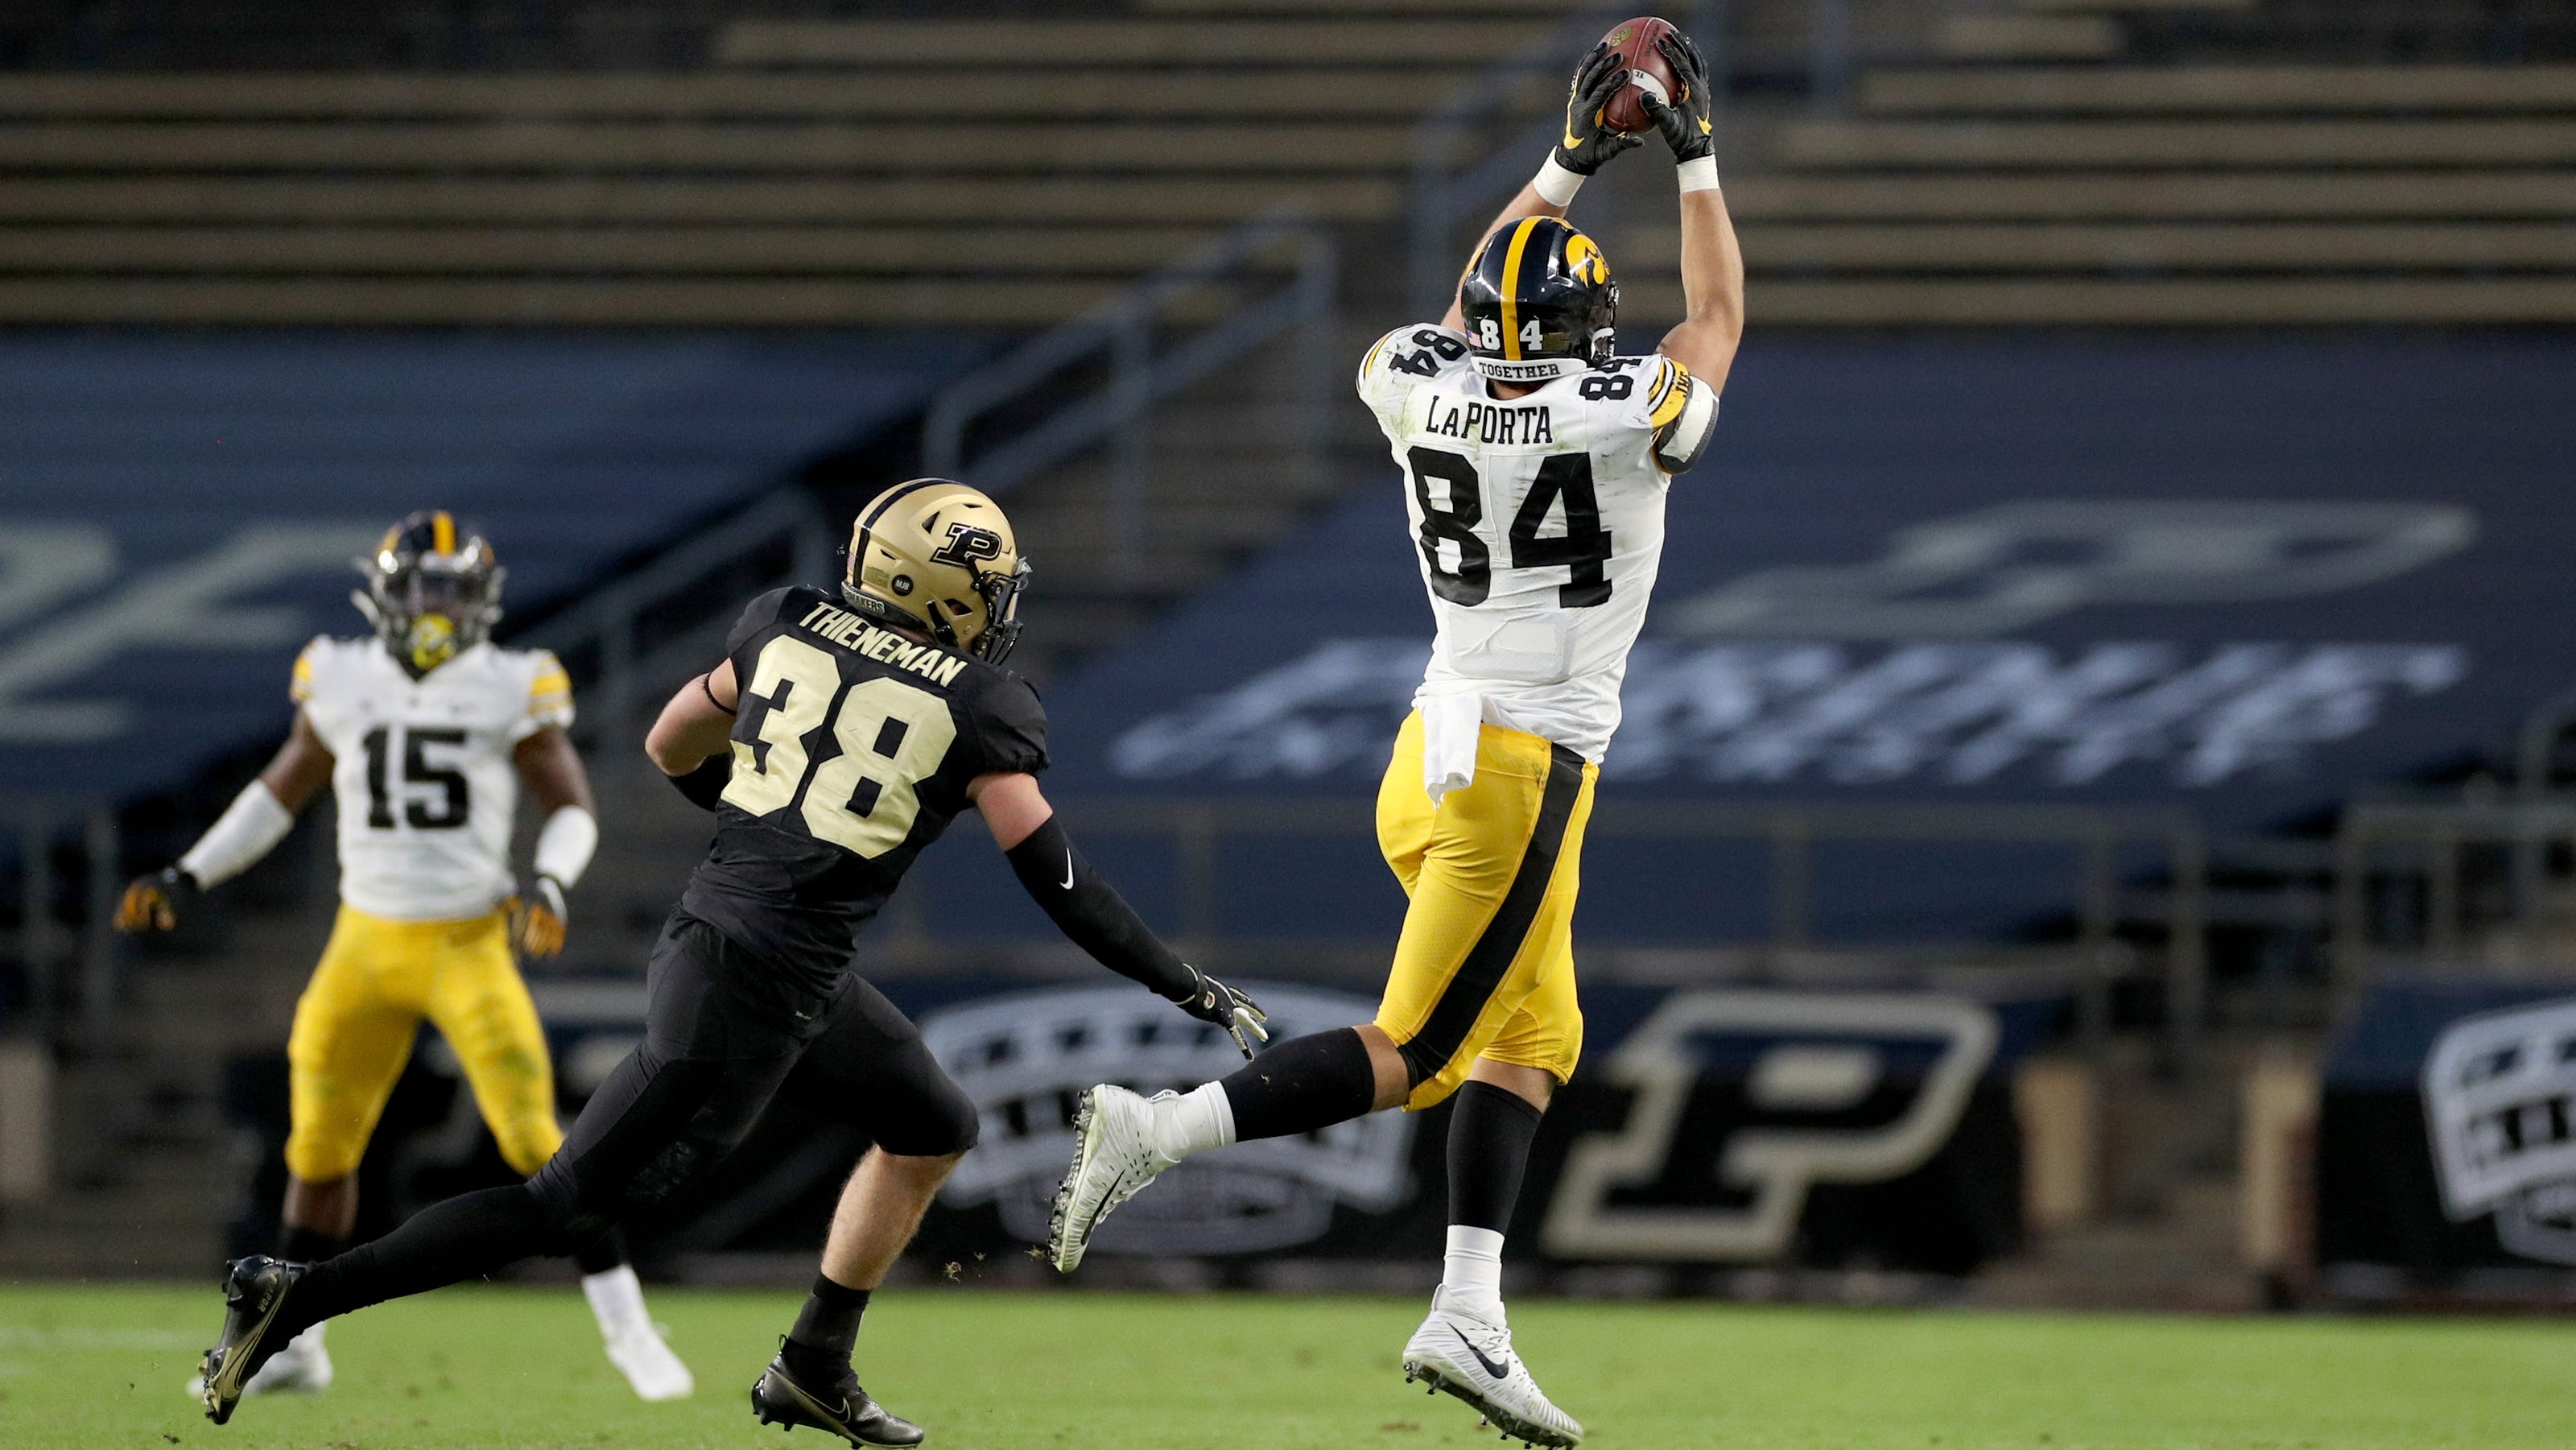 Iowa football: Sam LaPorta was overlooked in high school, but has quickly risen to top of depth chart as Hawkeye tight end